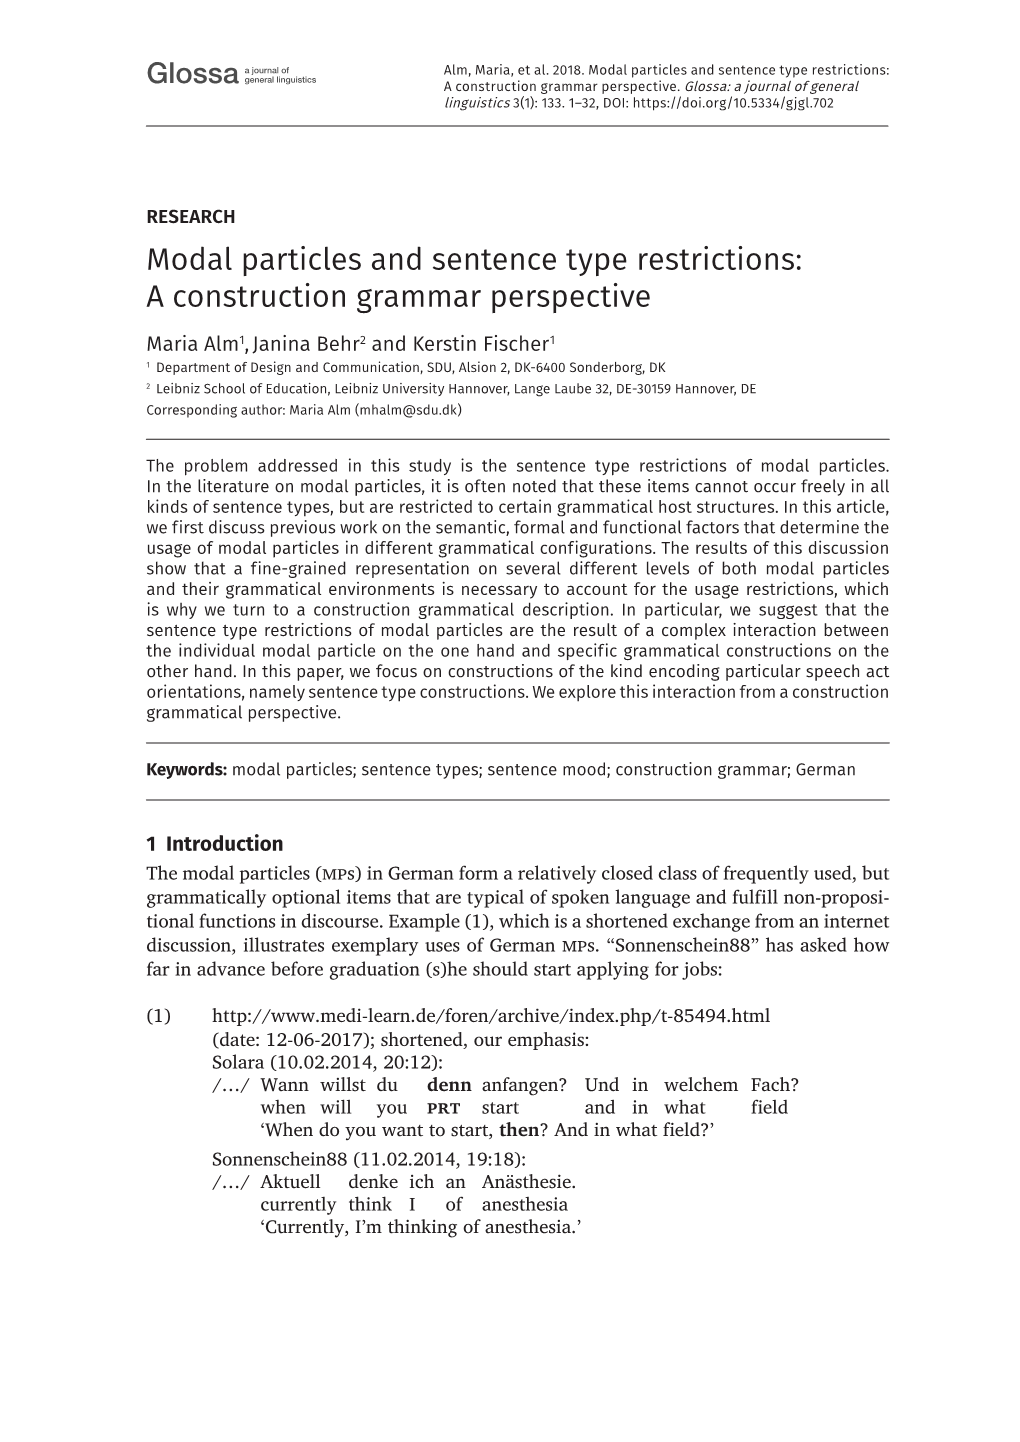 Modal Particles and Sentence Type Restrictions: a Construction Grammar